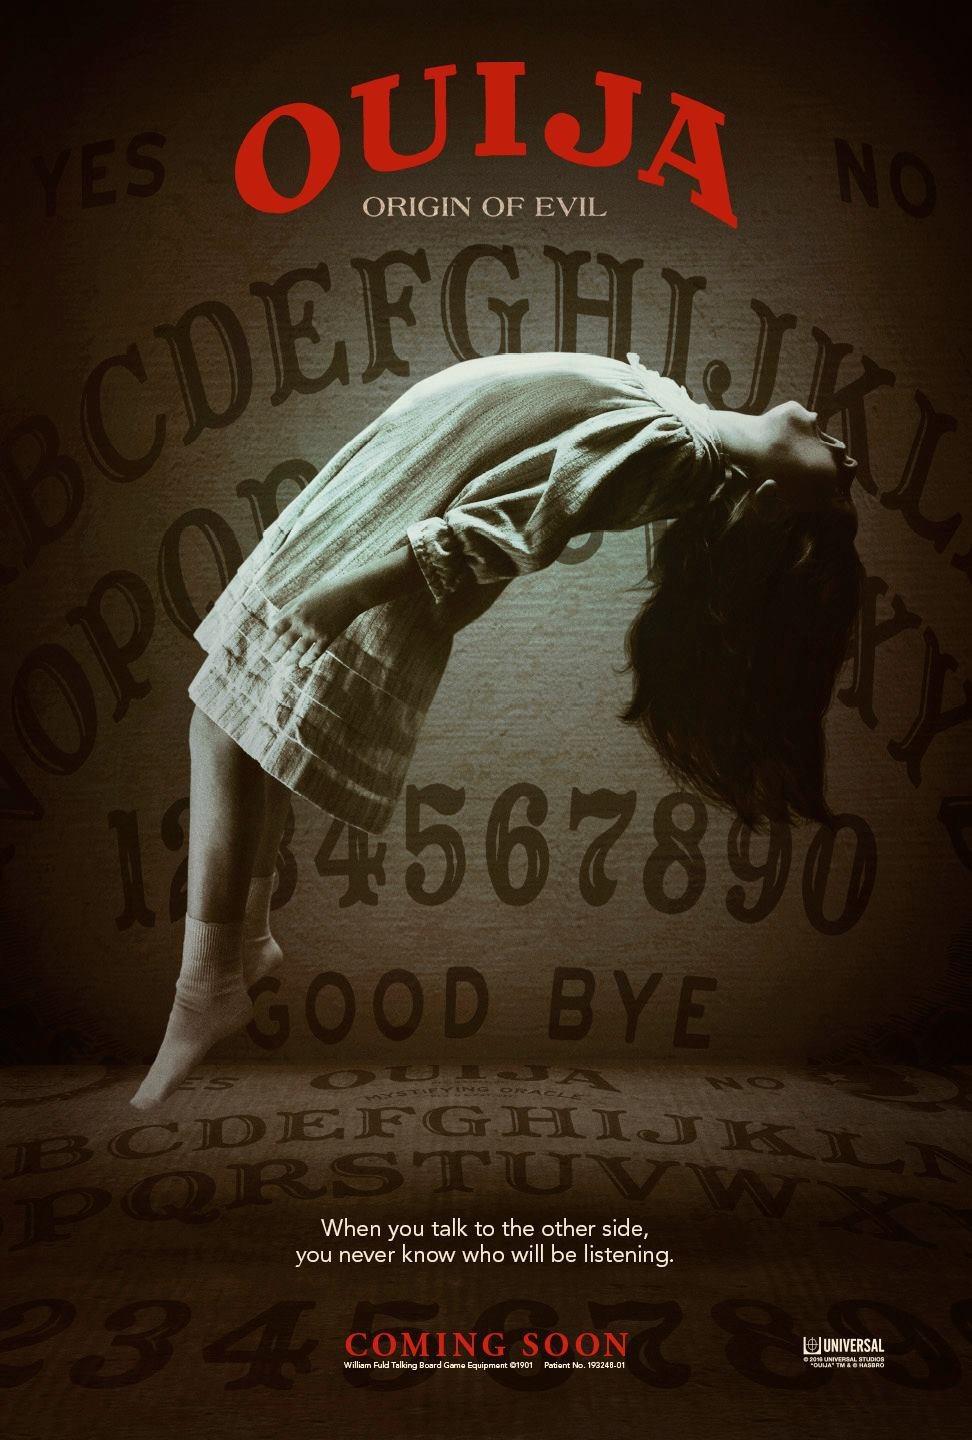 Ouija: When a group of friends attempt to communicate with the spirit world using a Ouija board, they unwittingly unleash dark forces that threaten to consume them.